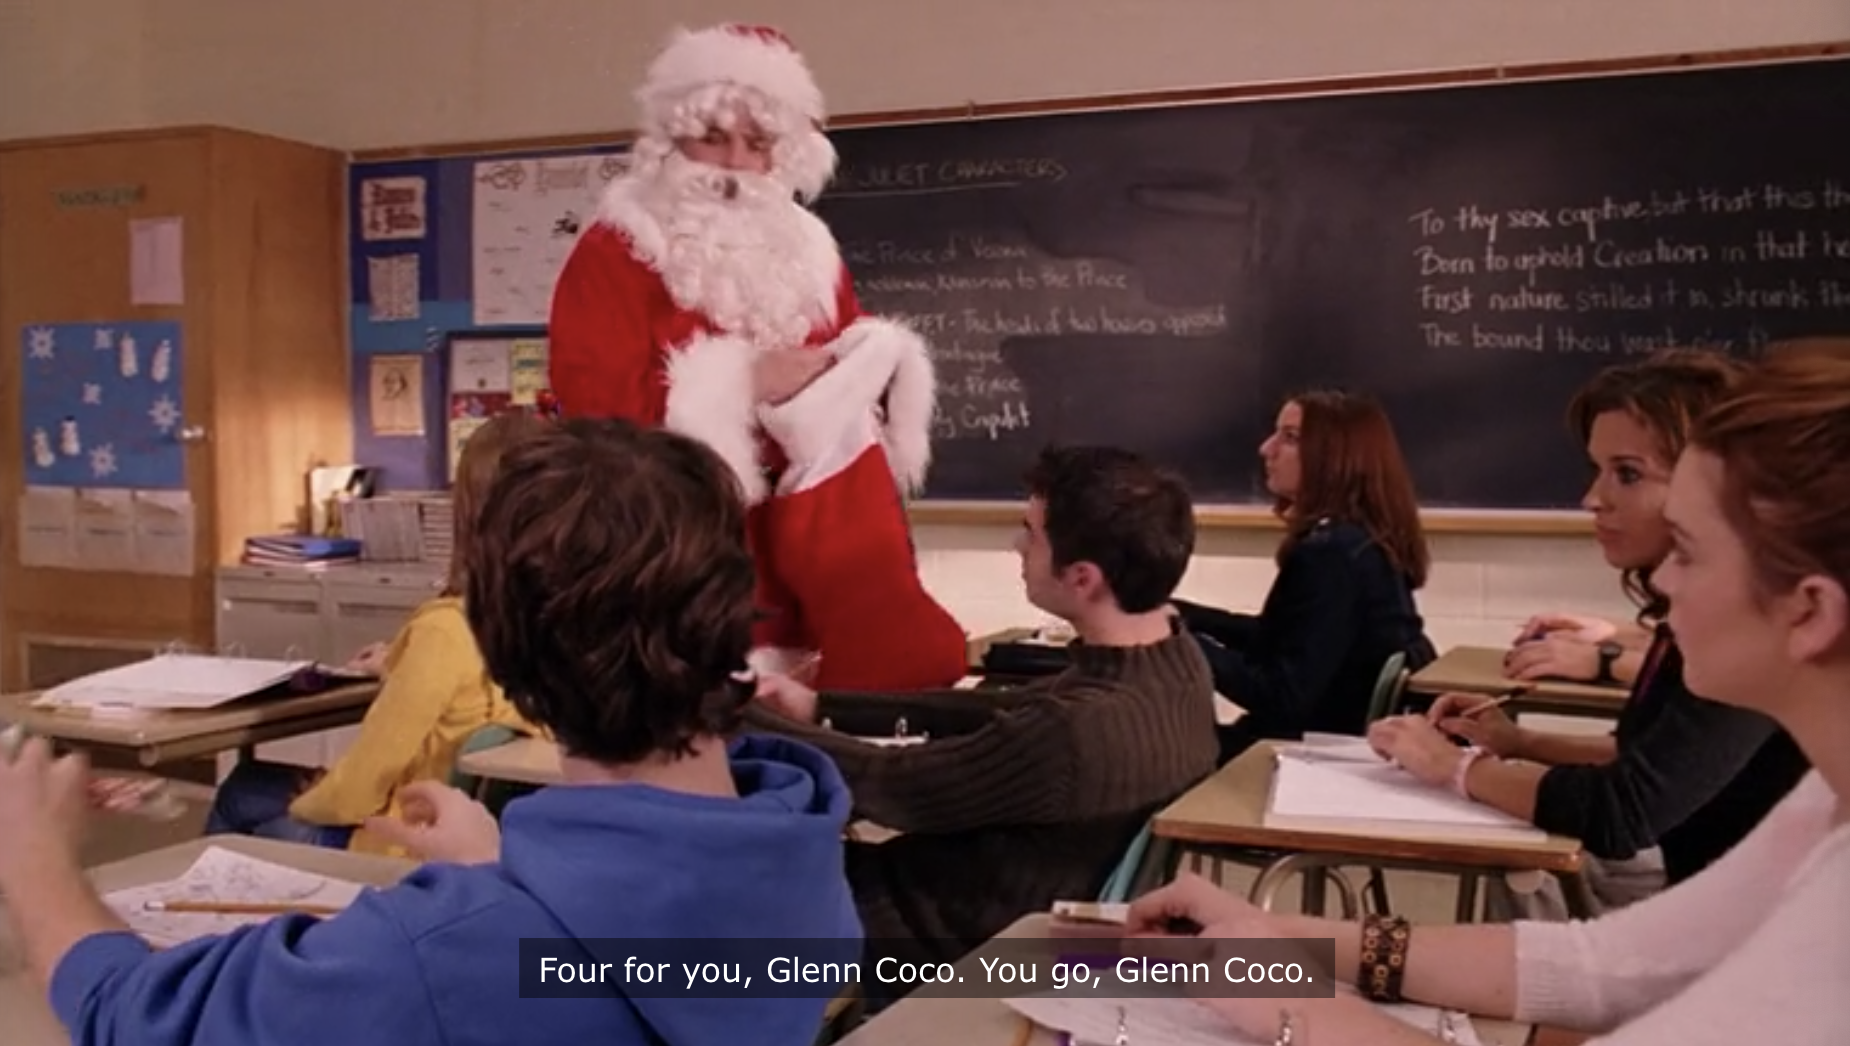 Damien handing Glenn Coco his four candy canes